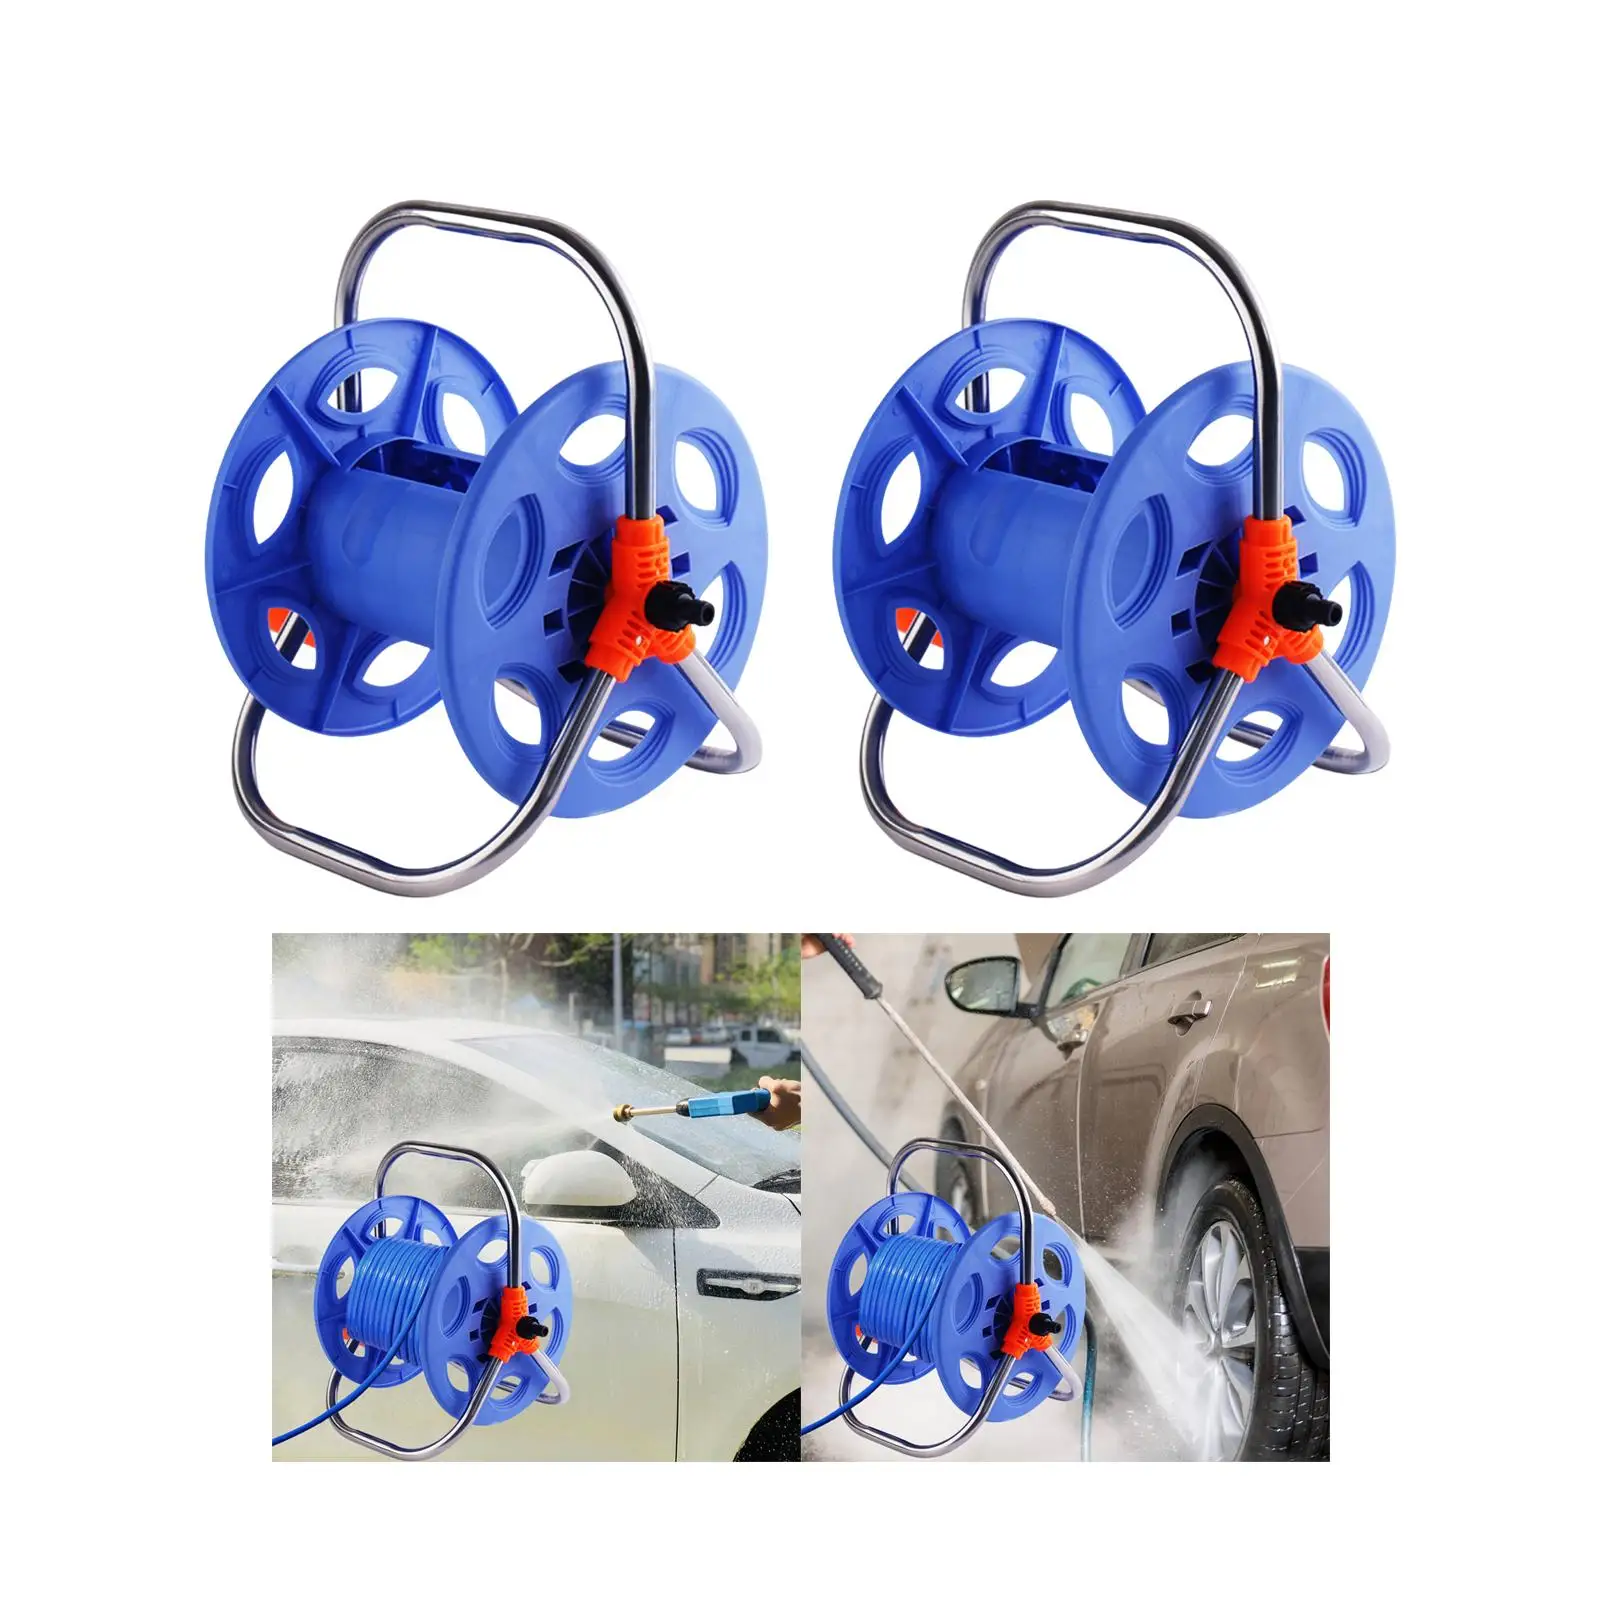 Water Hose Reel Hose Storage Stand for Outside Household Irrigation System